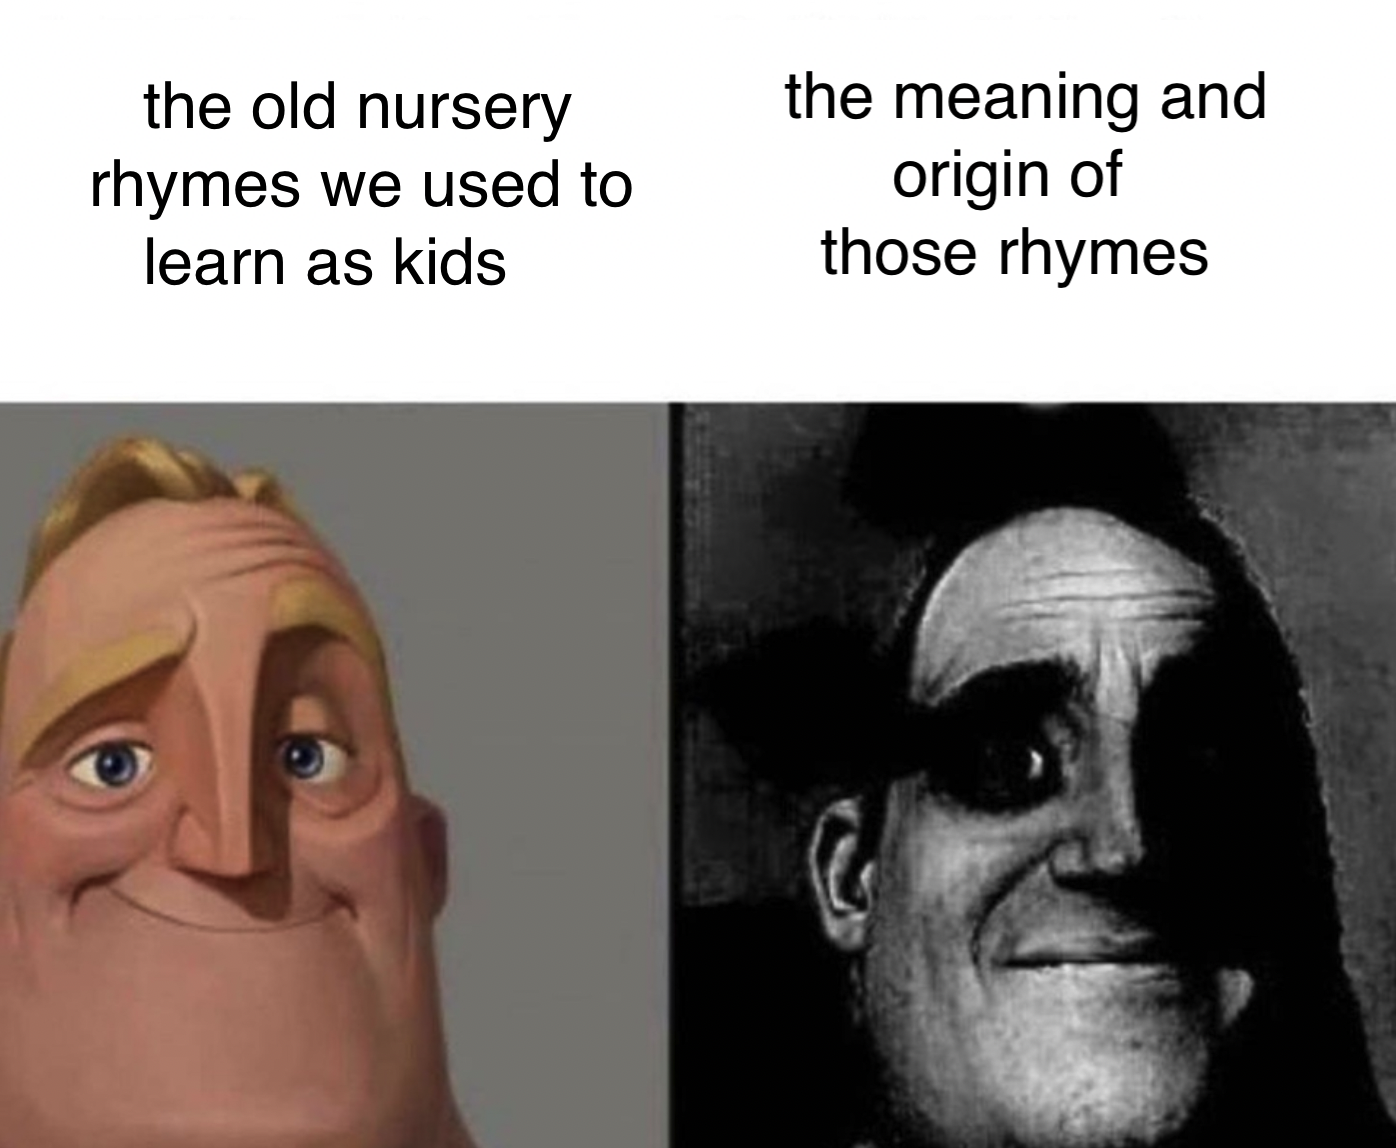 still don't know why we were taught those rhymes...